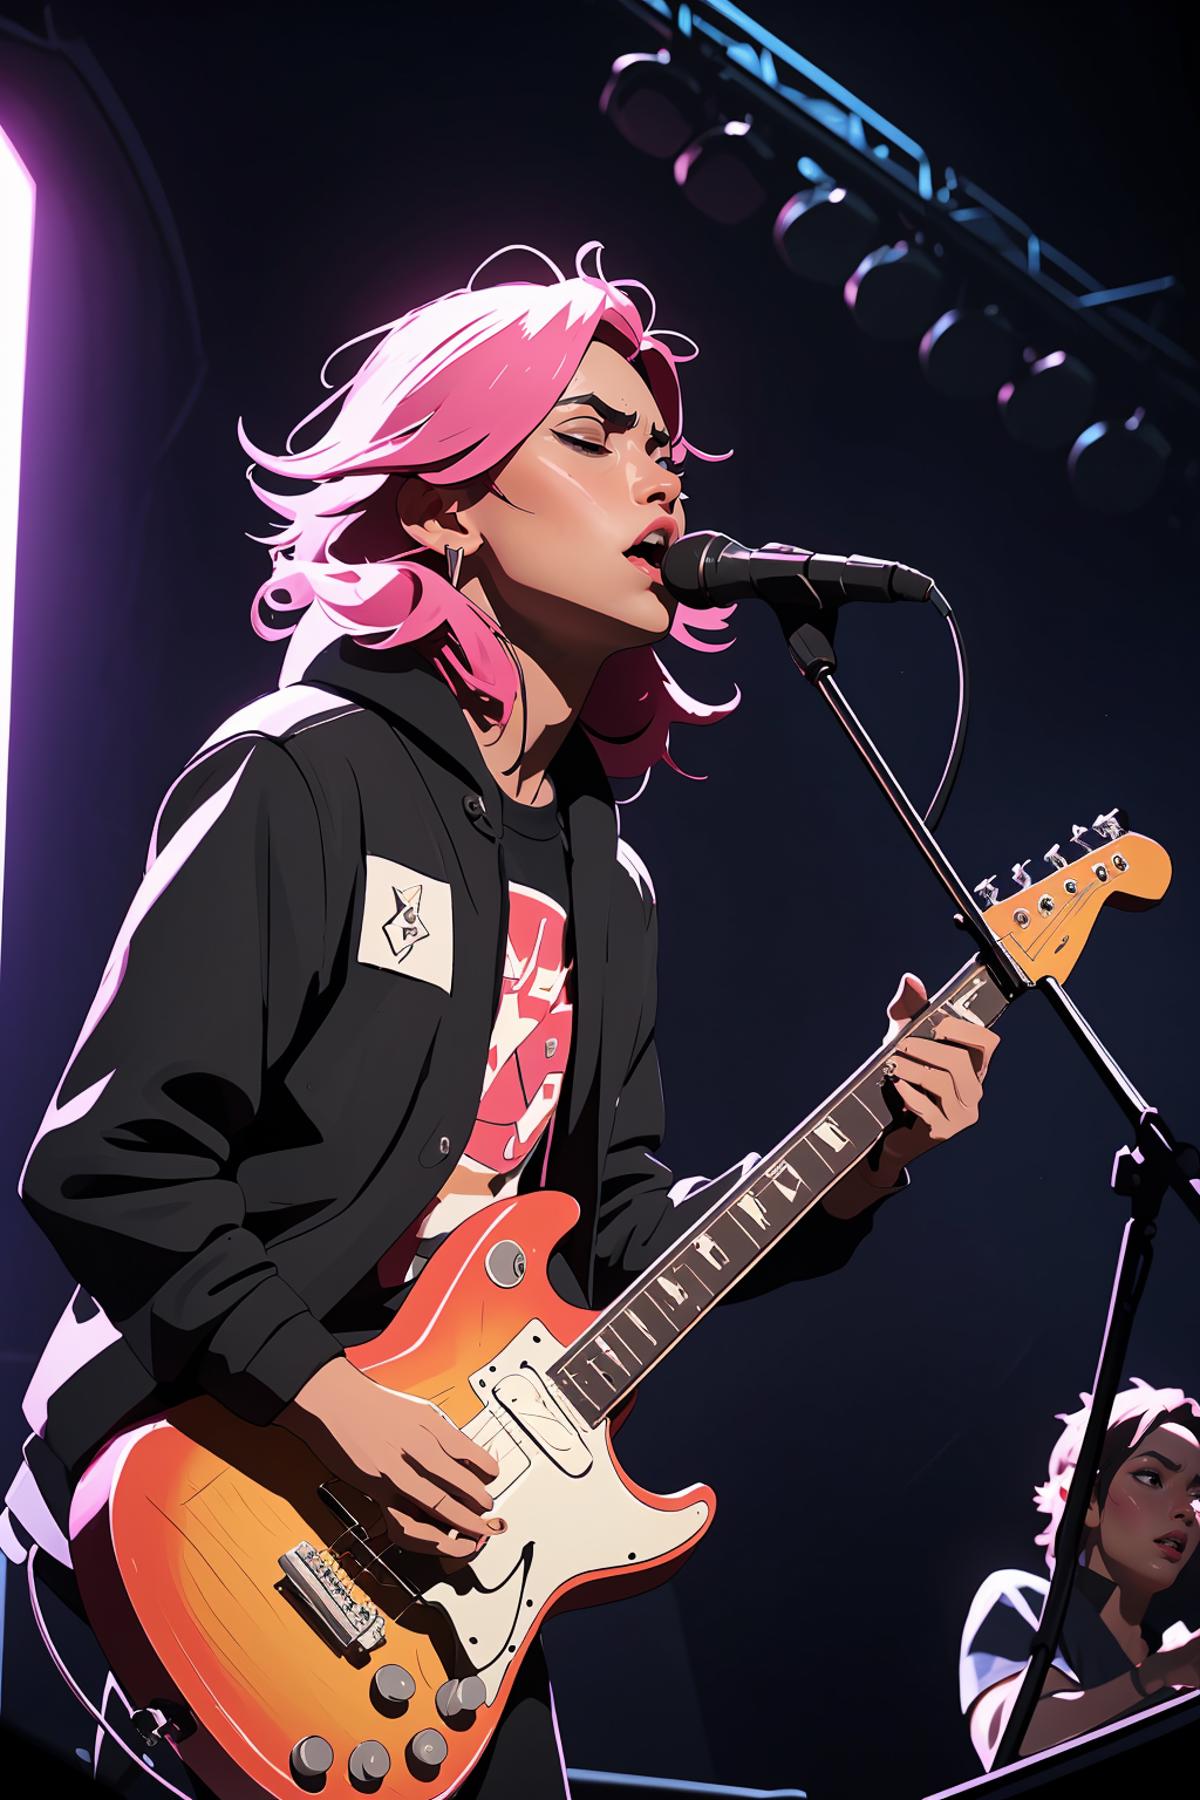 A pink-haired woman singing into a microphone while playing a guitar.